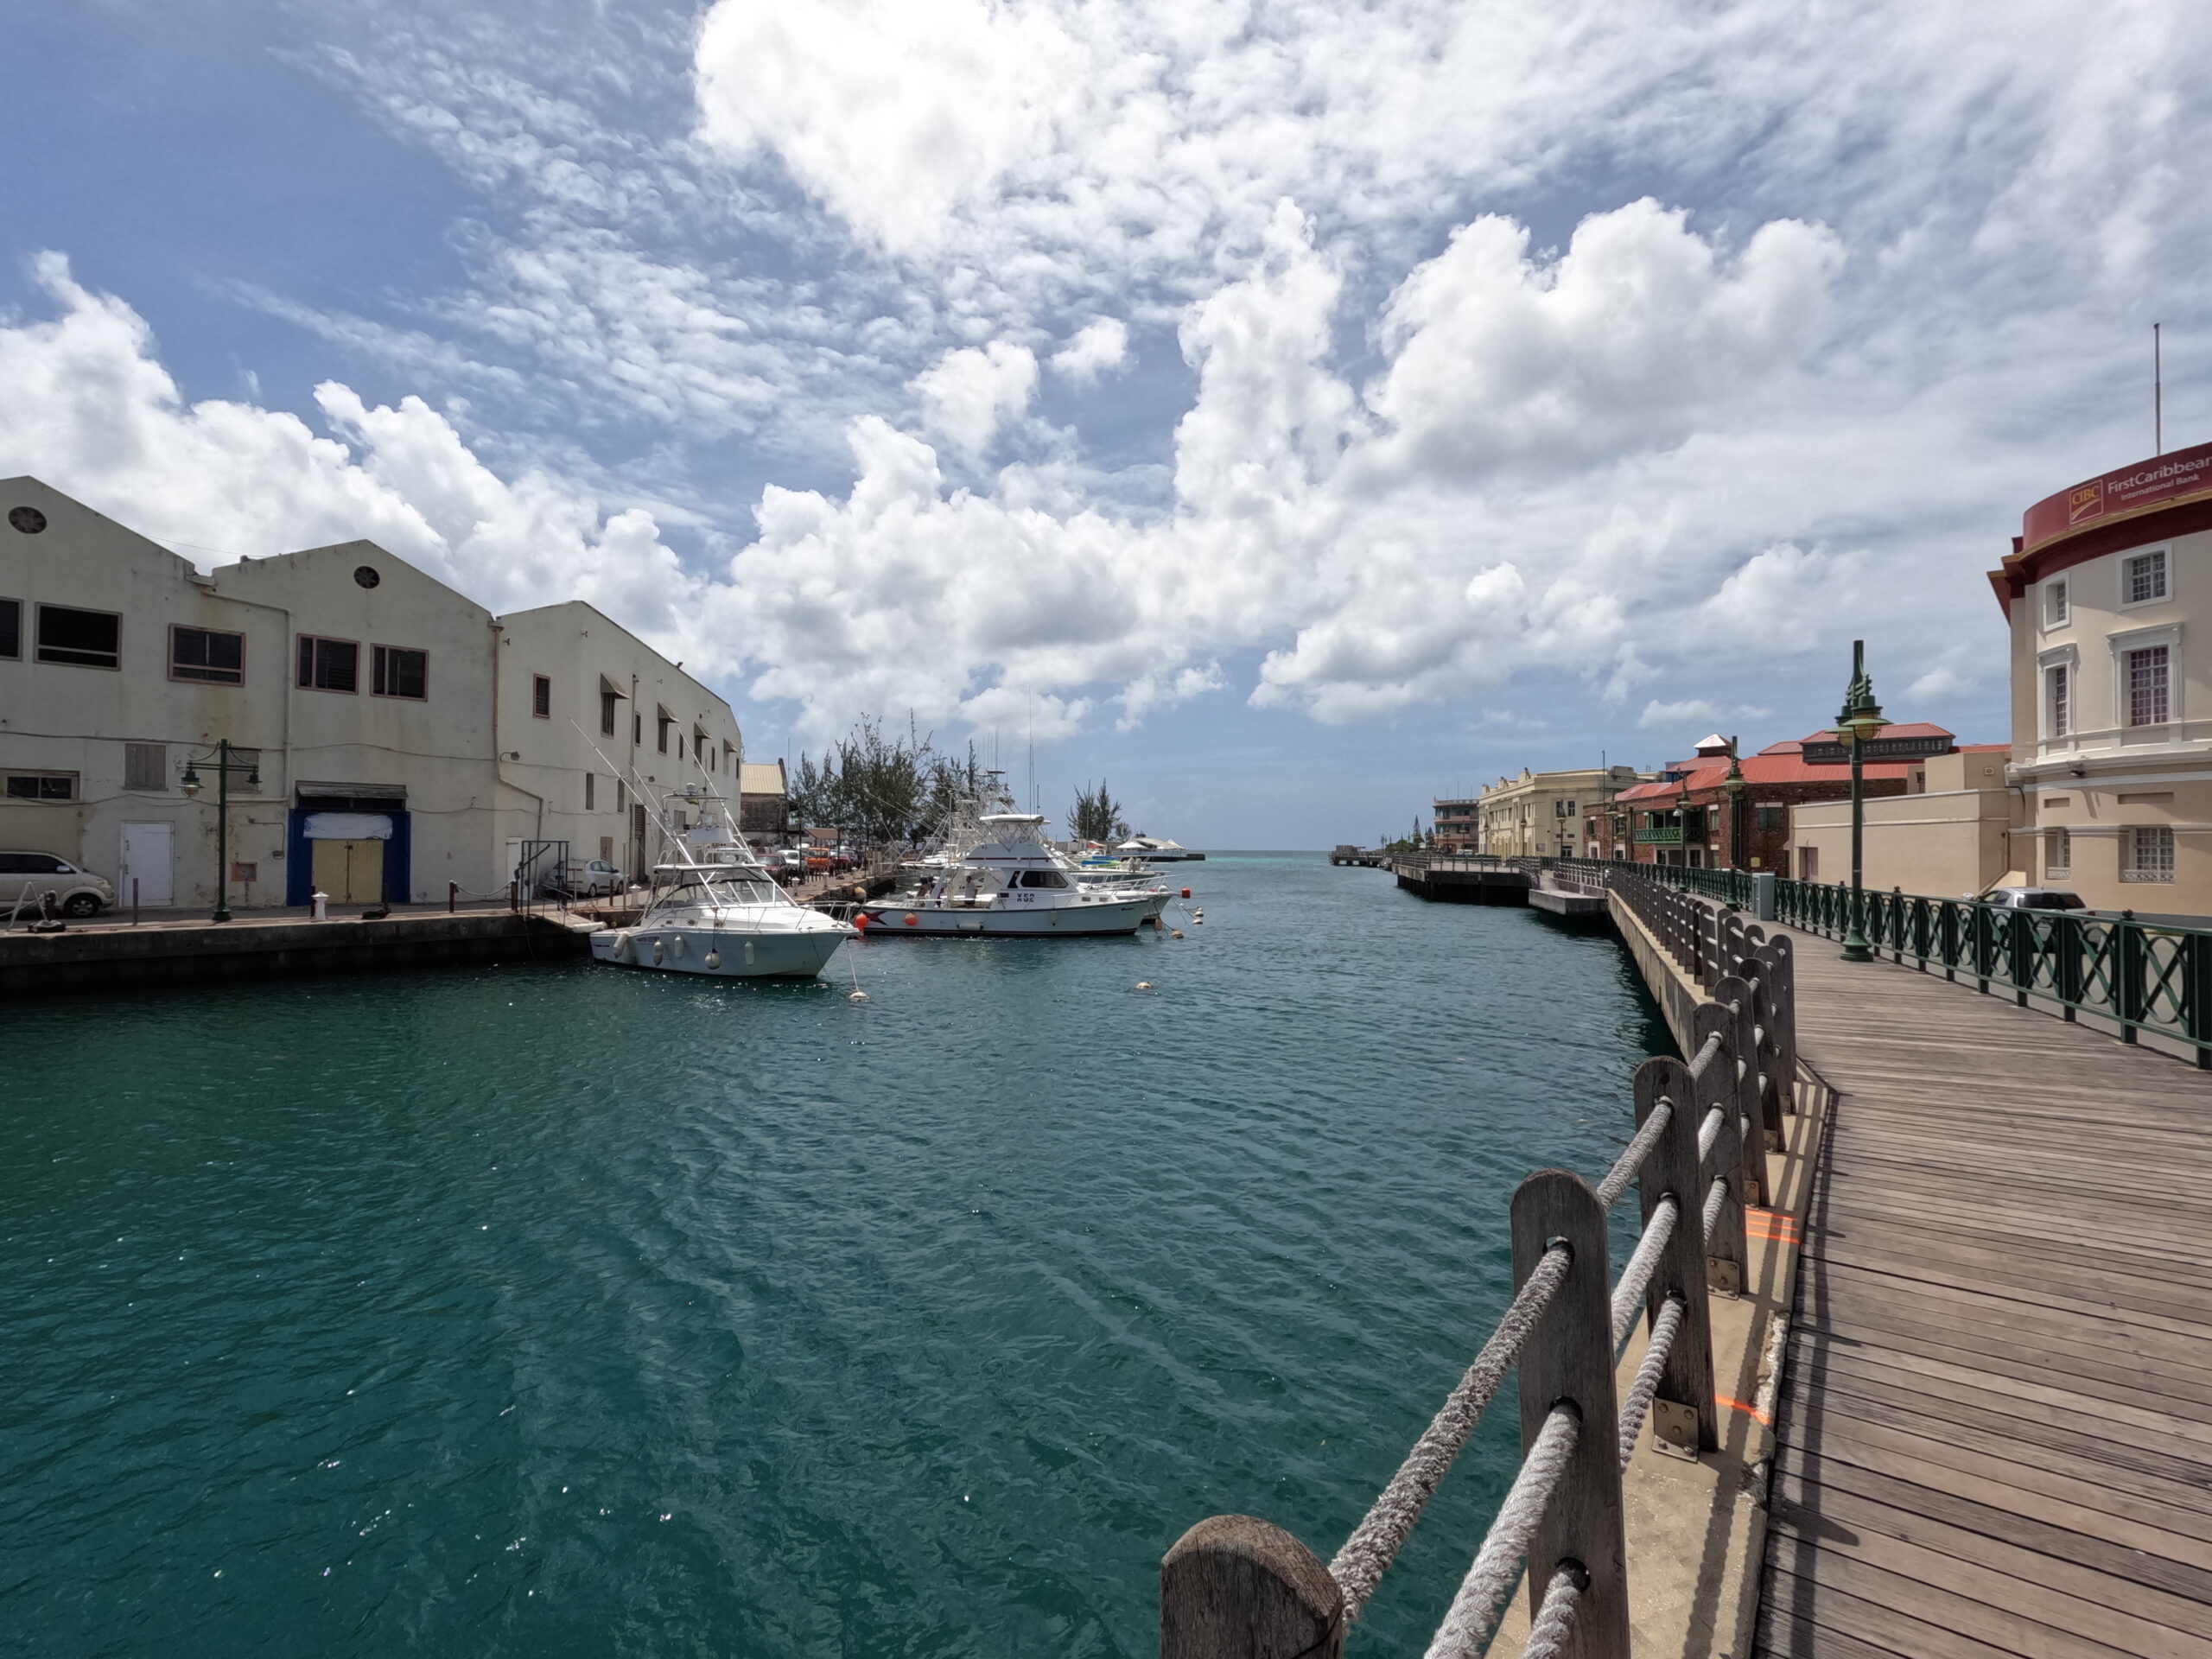 The walk in Bridgetown to Cruise takes about 15 minutes